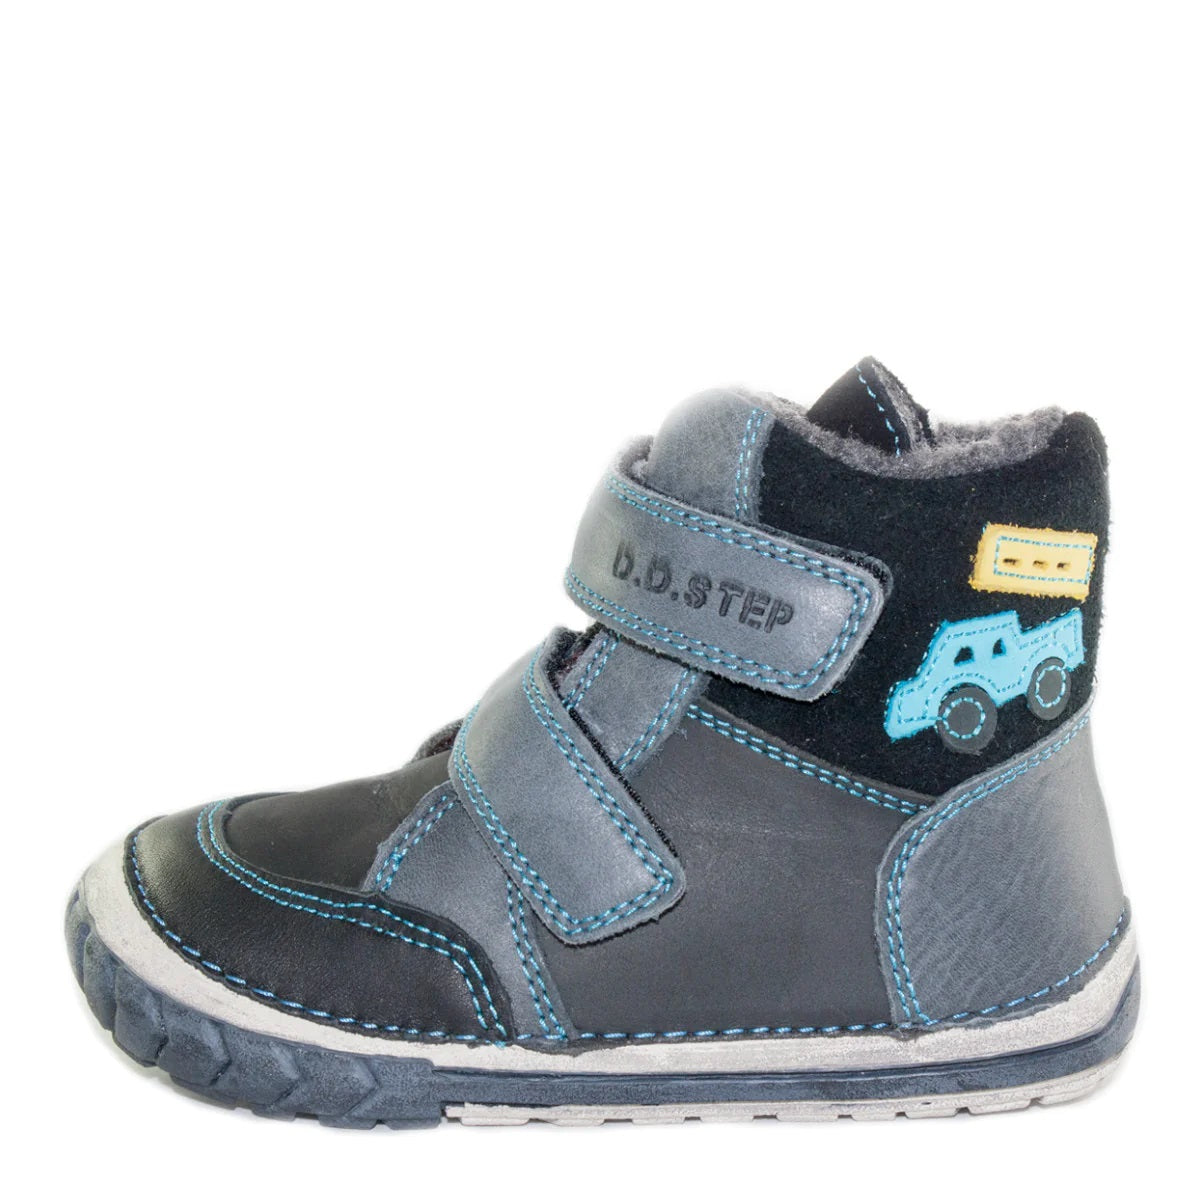 D.D. Step Toddler Boy Shoes/Winter Boots With Faux Fur Insulation Grey Blue Truck - Supportive Leather Shoes From Europe Kids Orthopedic - shoekid.ca